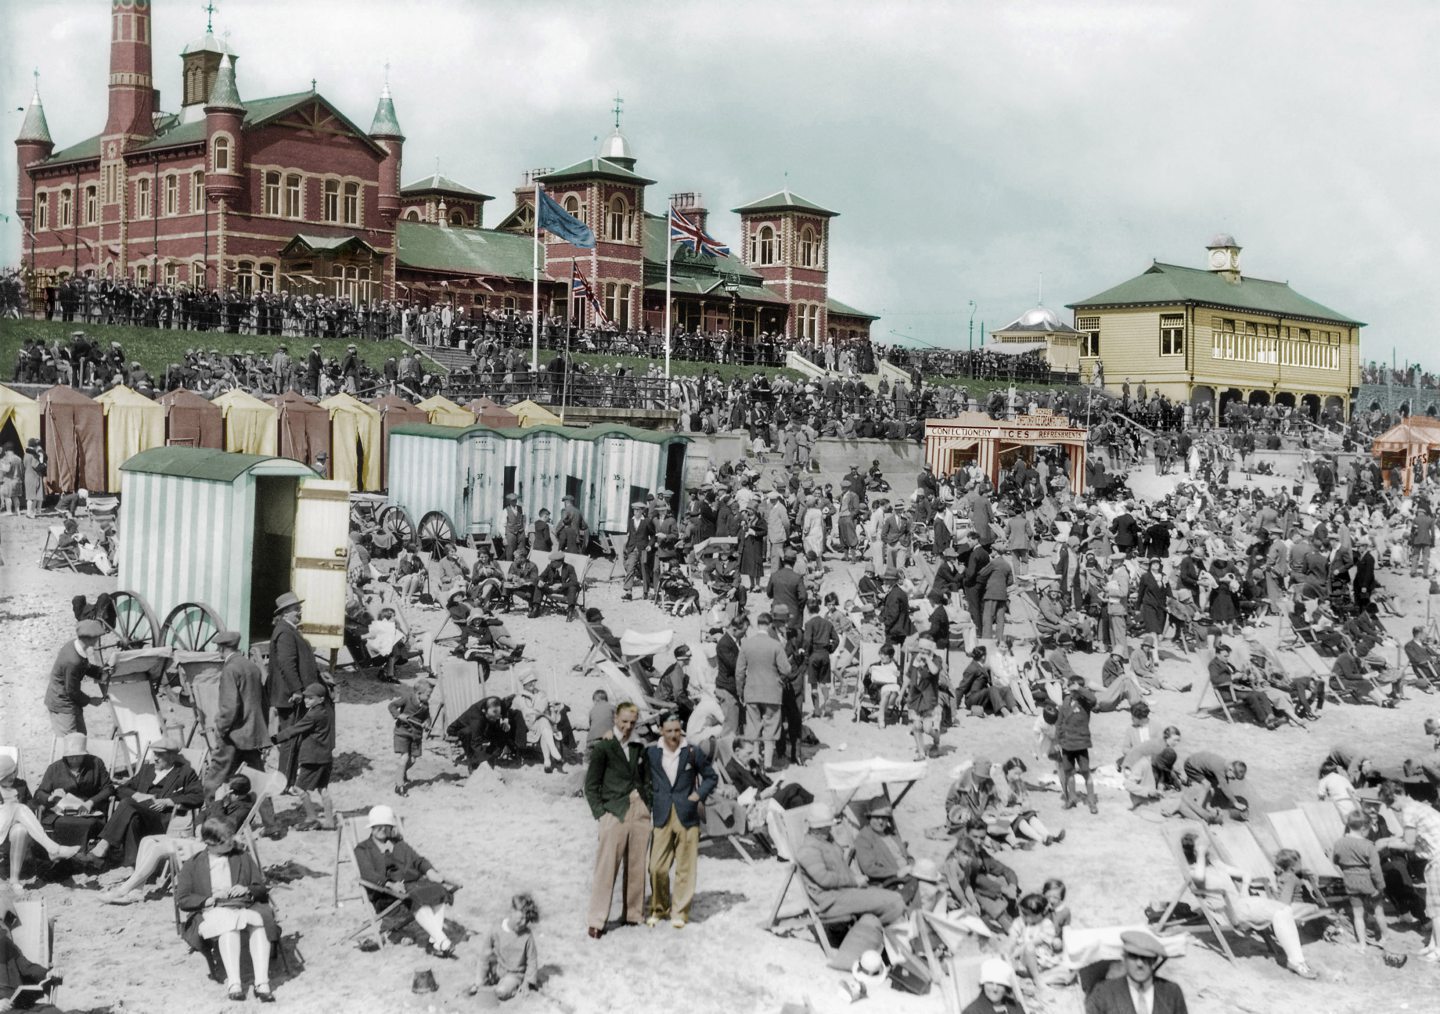 Huge crowds grace Aberdeen Beach in this 1930s picture with the iconic Beach Baths building dominating the skyline